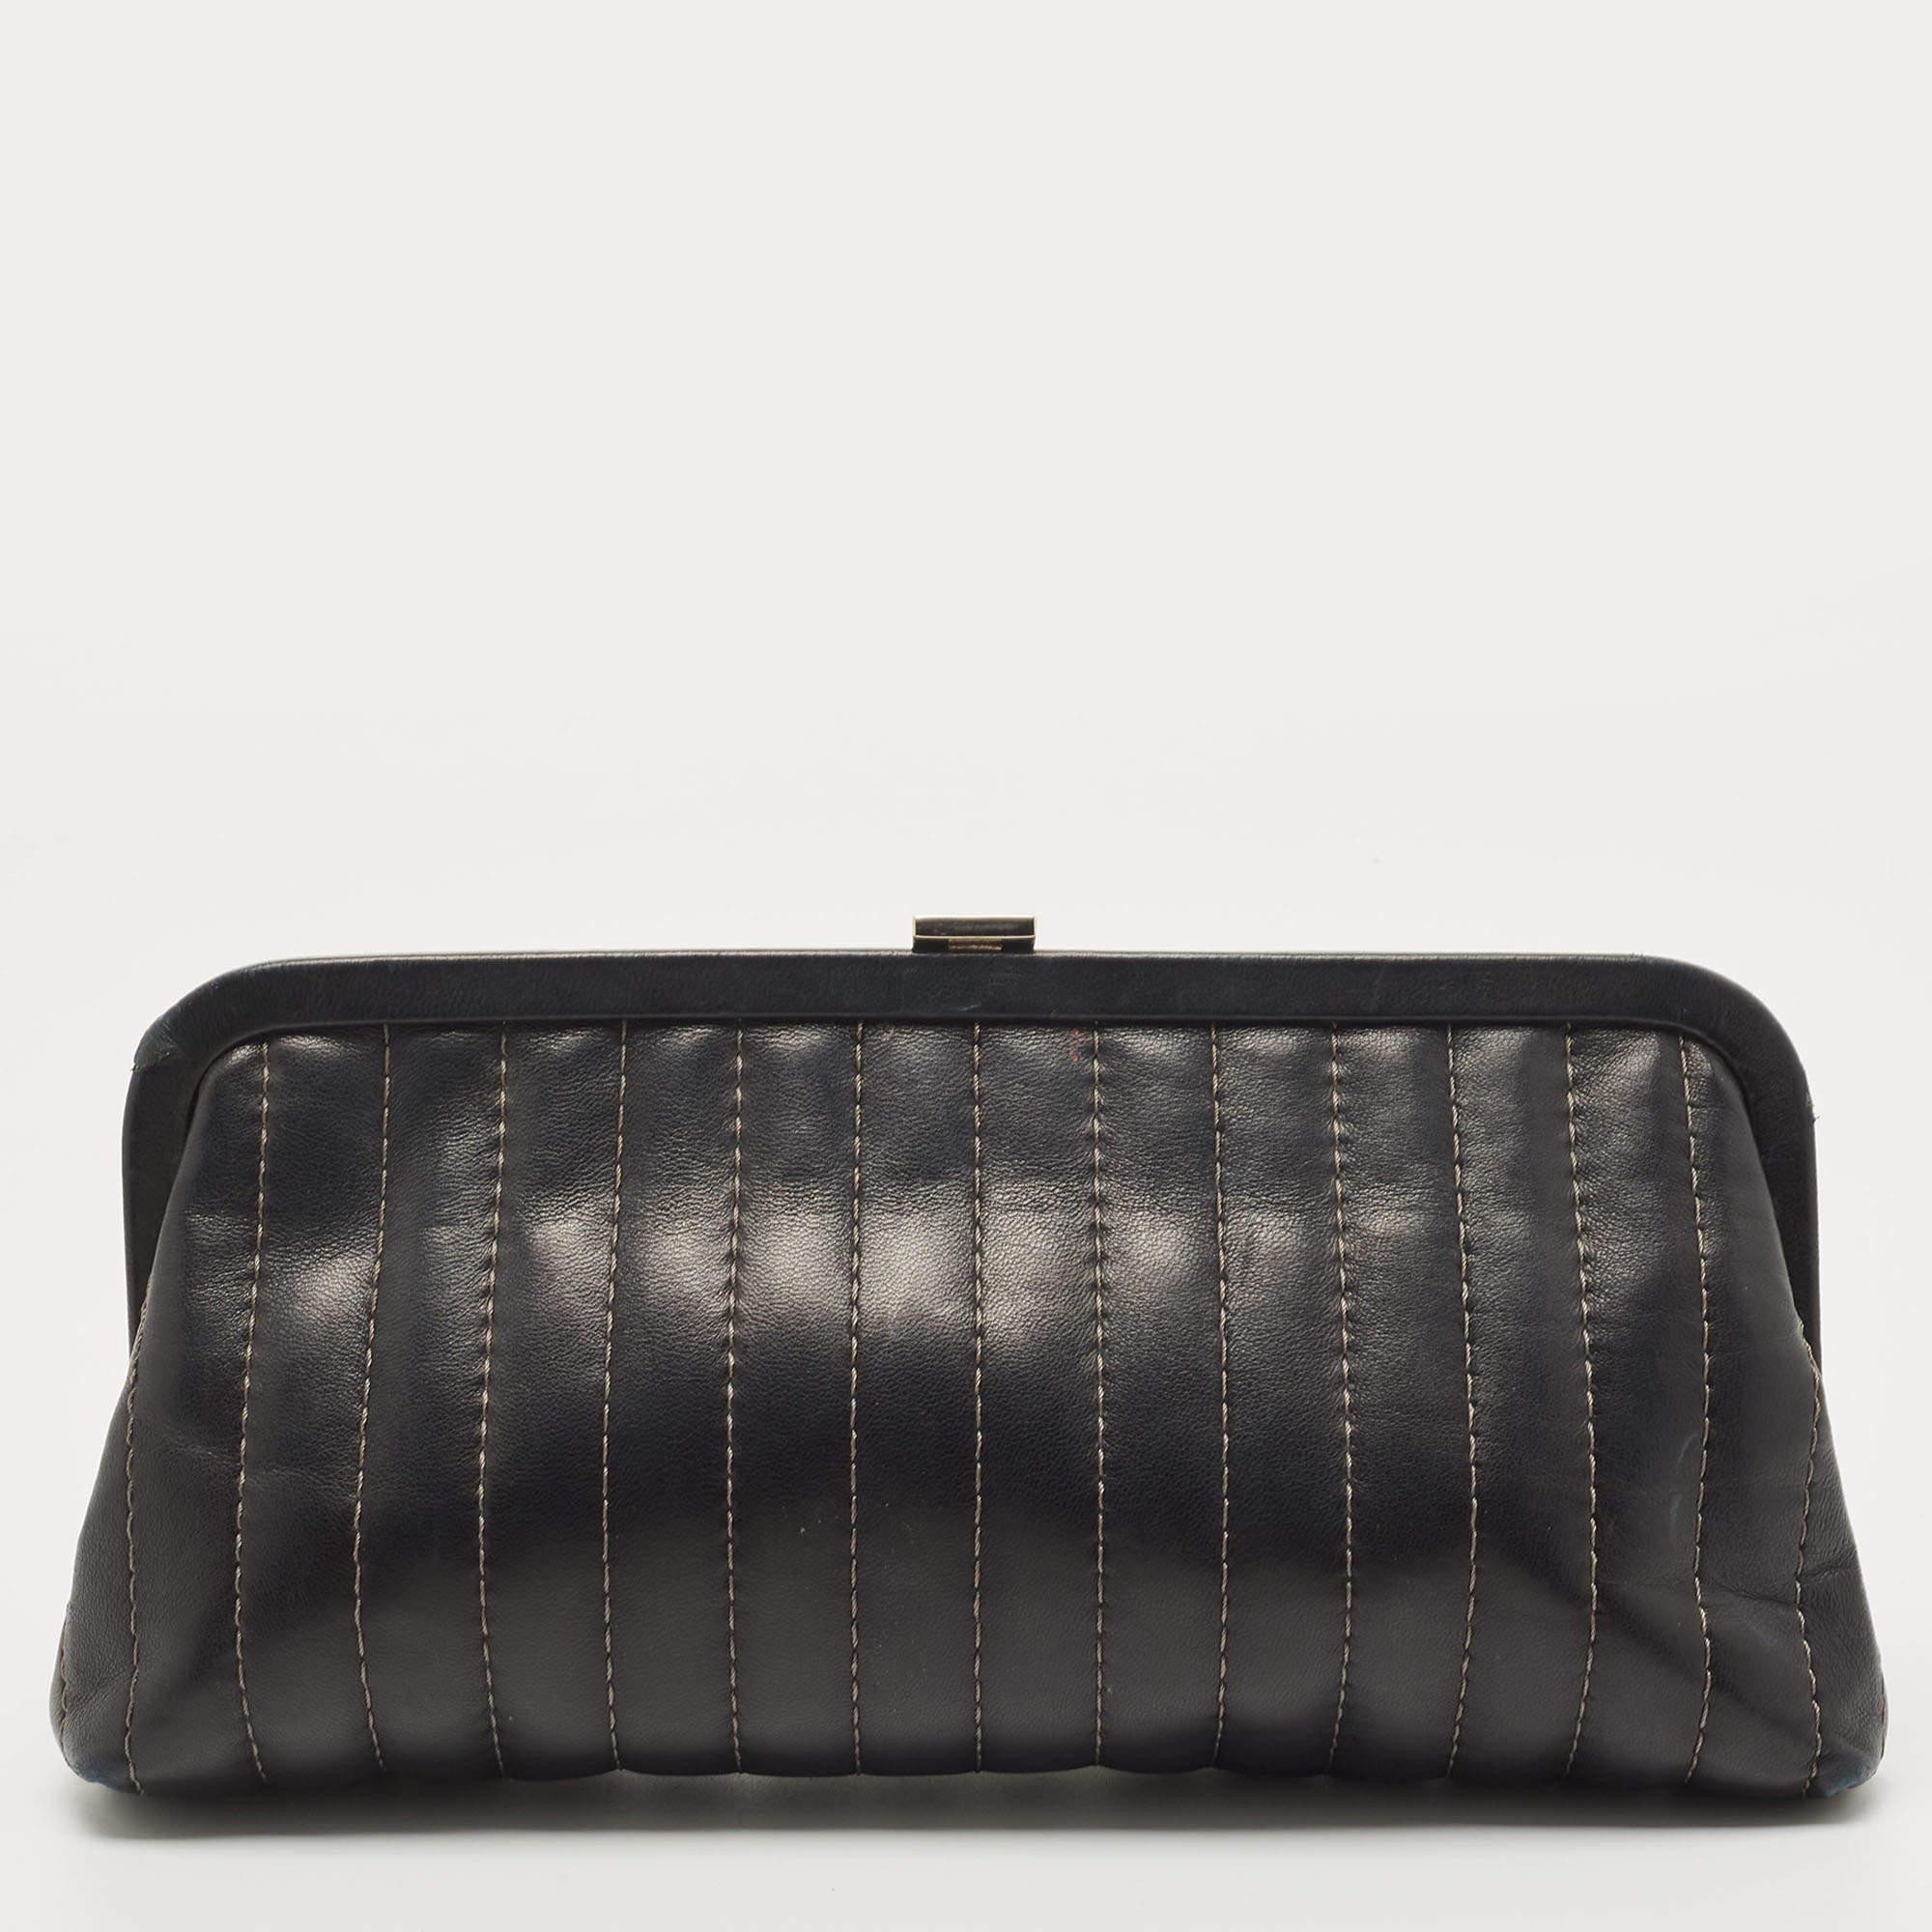 This Chanel vintage clutch for women has the kind of design that ensures high appeal, whether held in your hand or tucked under your arm. It is a meticulously crafted piece bound to last a long time.

